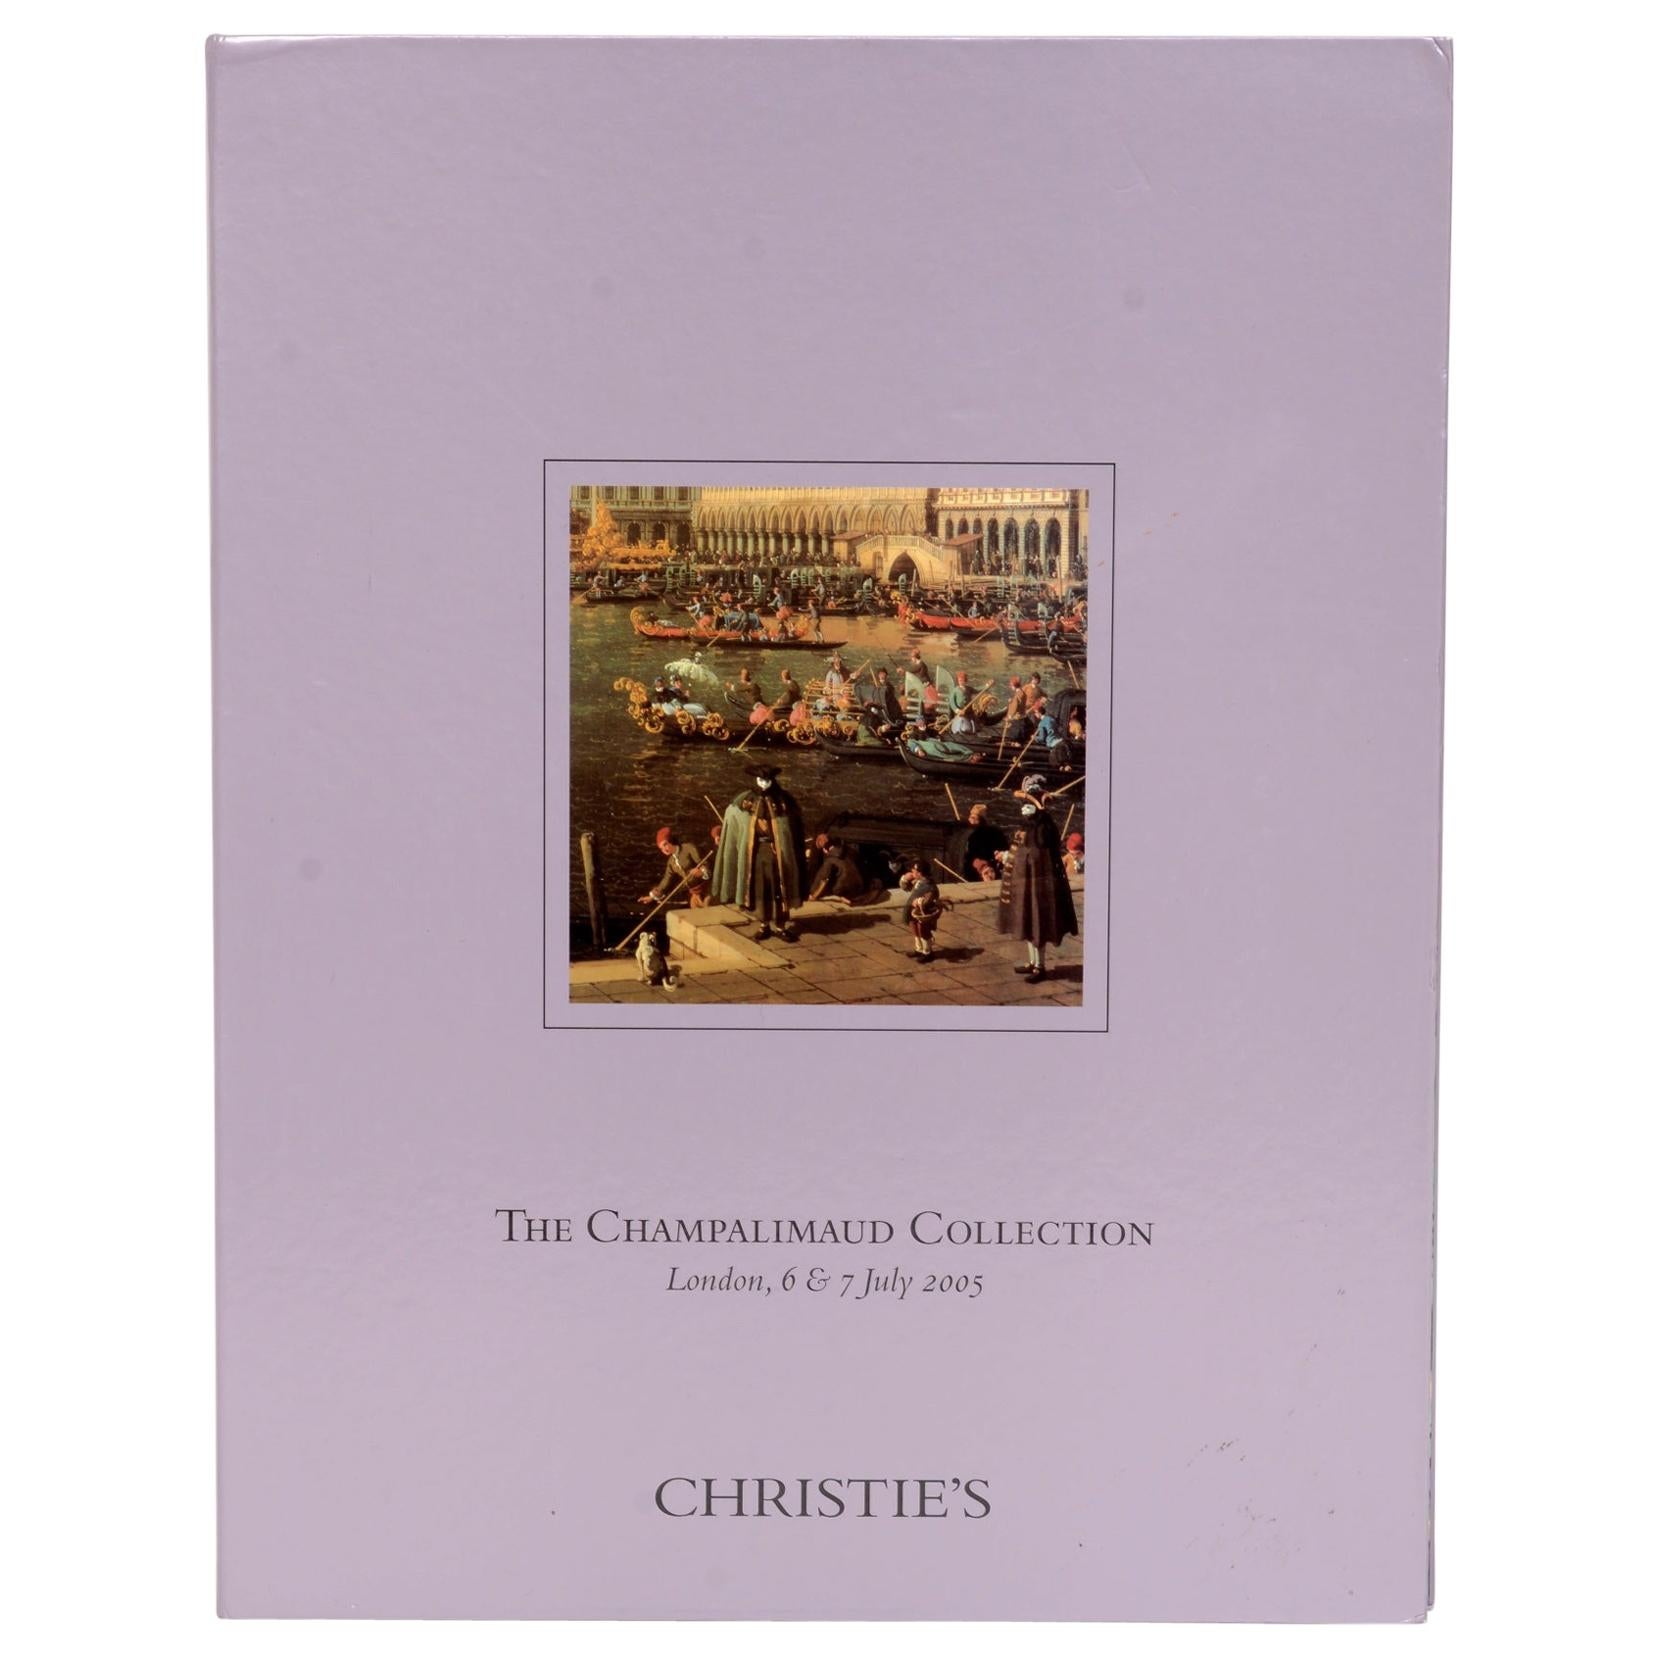 Christie's Champalimaud Collection London, 6 & 7 July 2005, First Edition